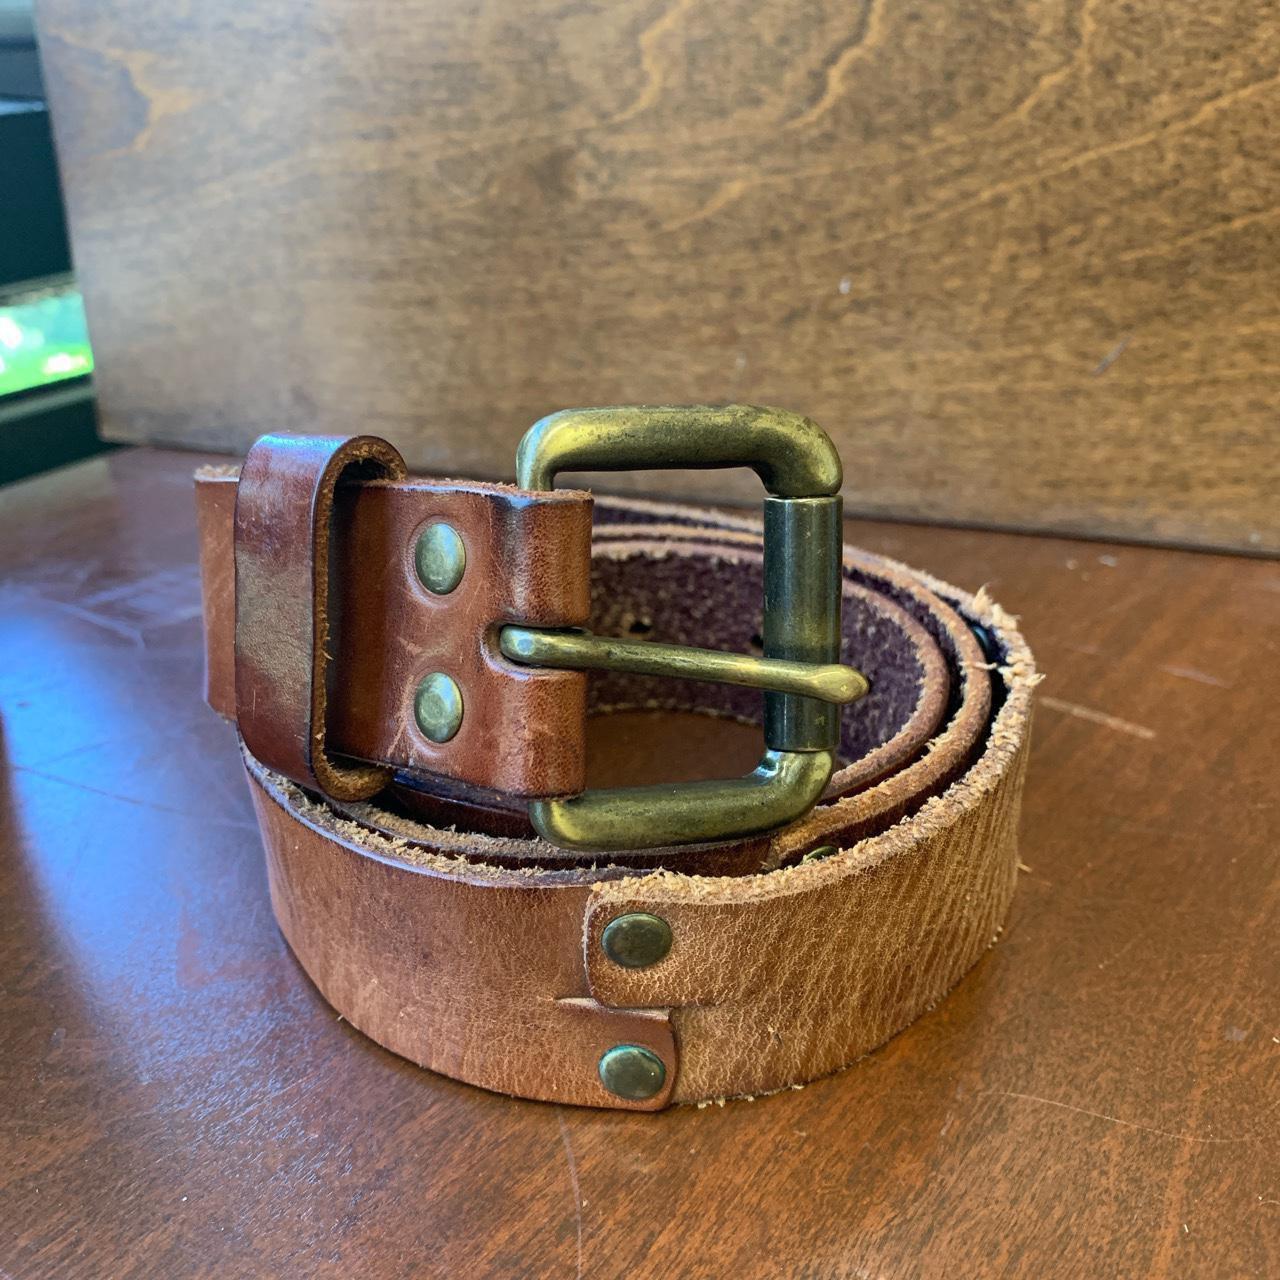 Women's Brown Lucky Brand Leather Belts